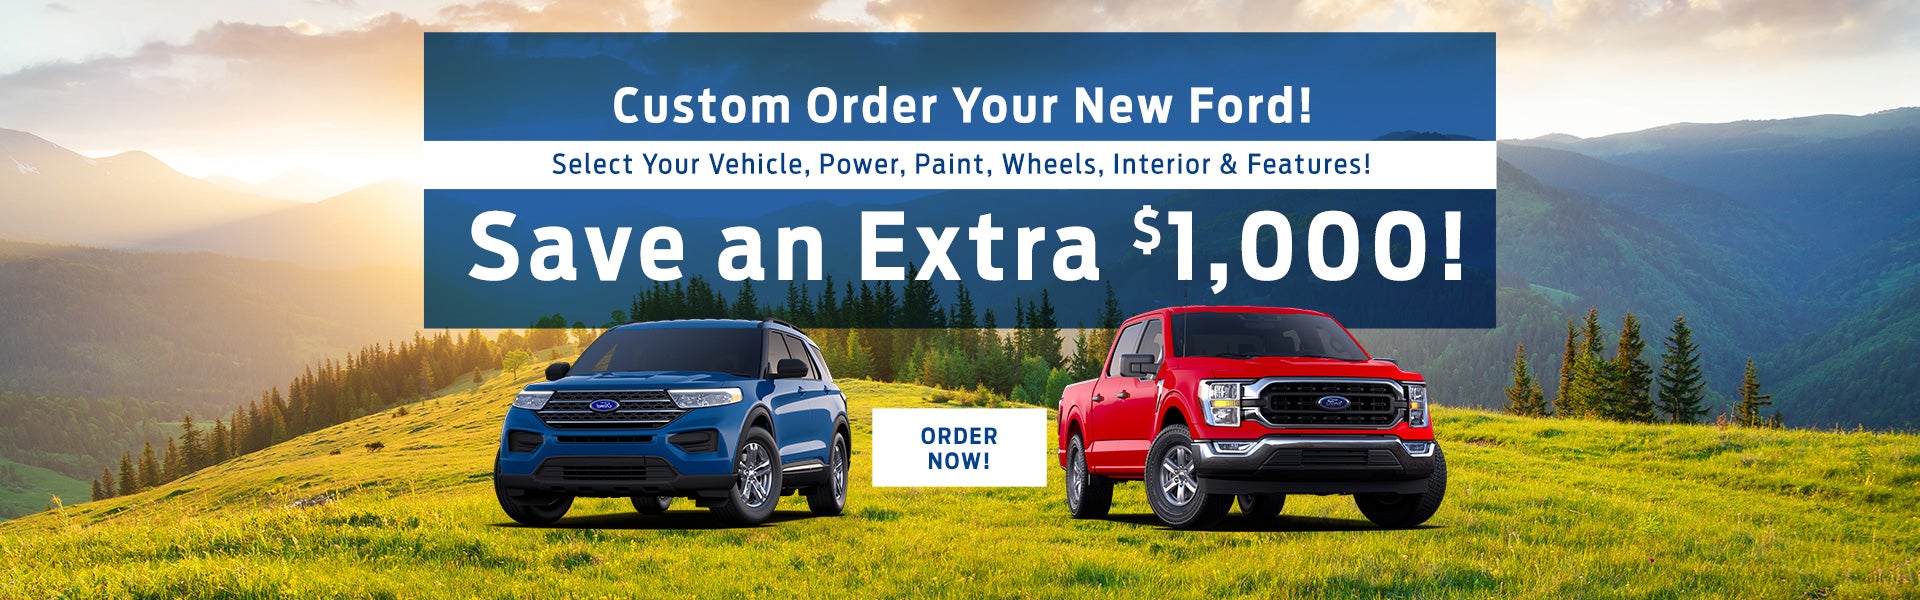 Custom Order Your Ford